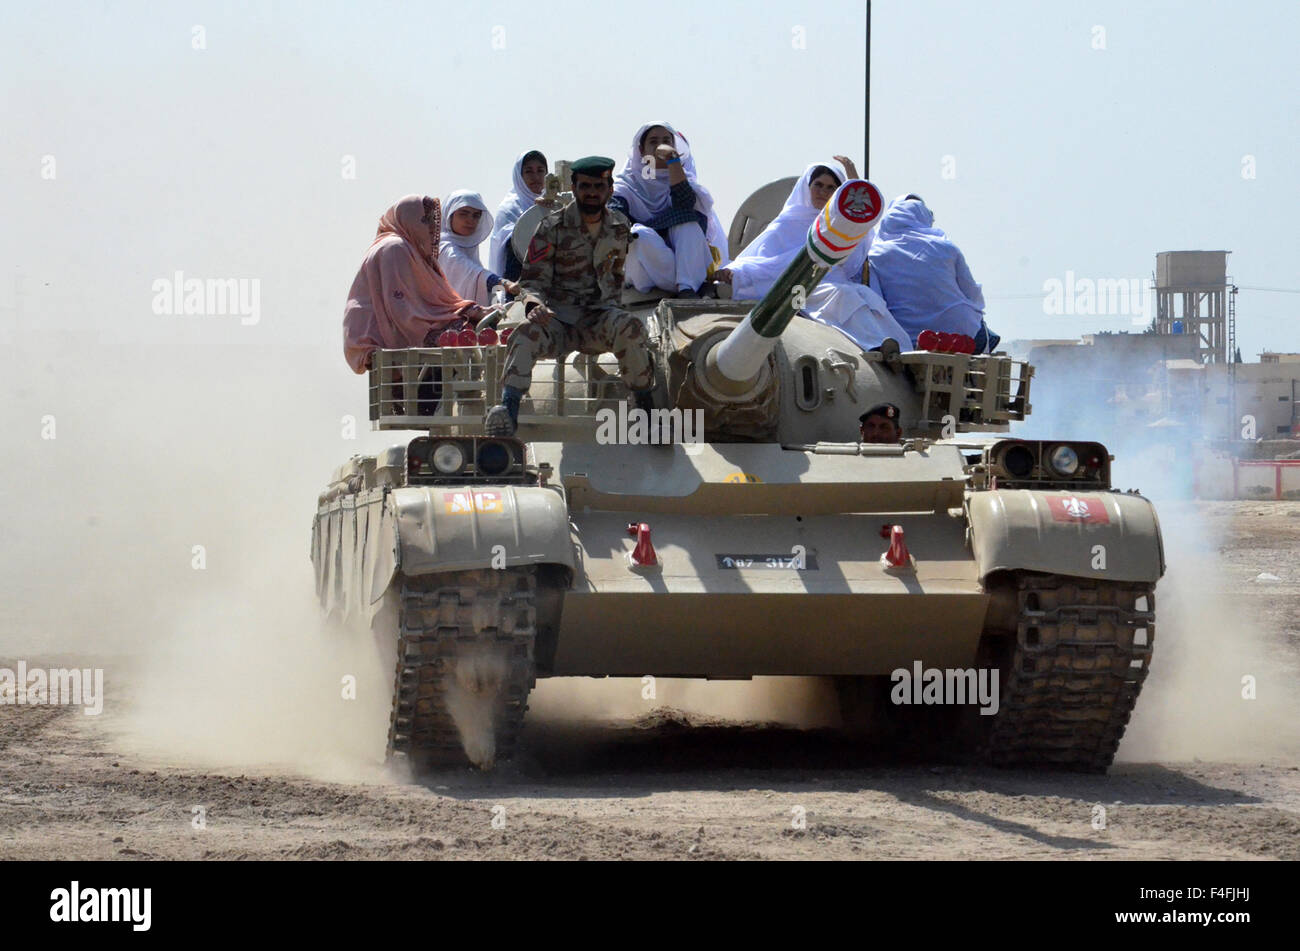 Quetta. 17th Oct, 2015. Female students ride on a tank during a weapon training session in southwest Pakistan's Quetta, Oct. 17, 2015. Authorities have commenced special weapon training sessions for female students of Sardar Bahadur Khan Women's University in Quetta. © Irfan/Xinhua/Alamy Live News Stock Photo